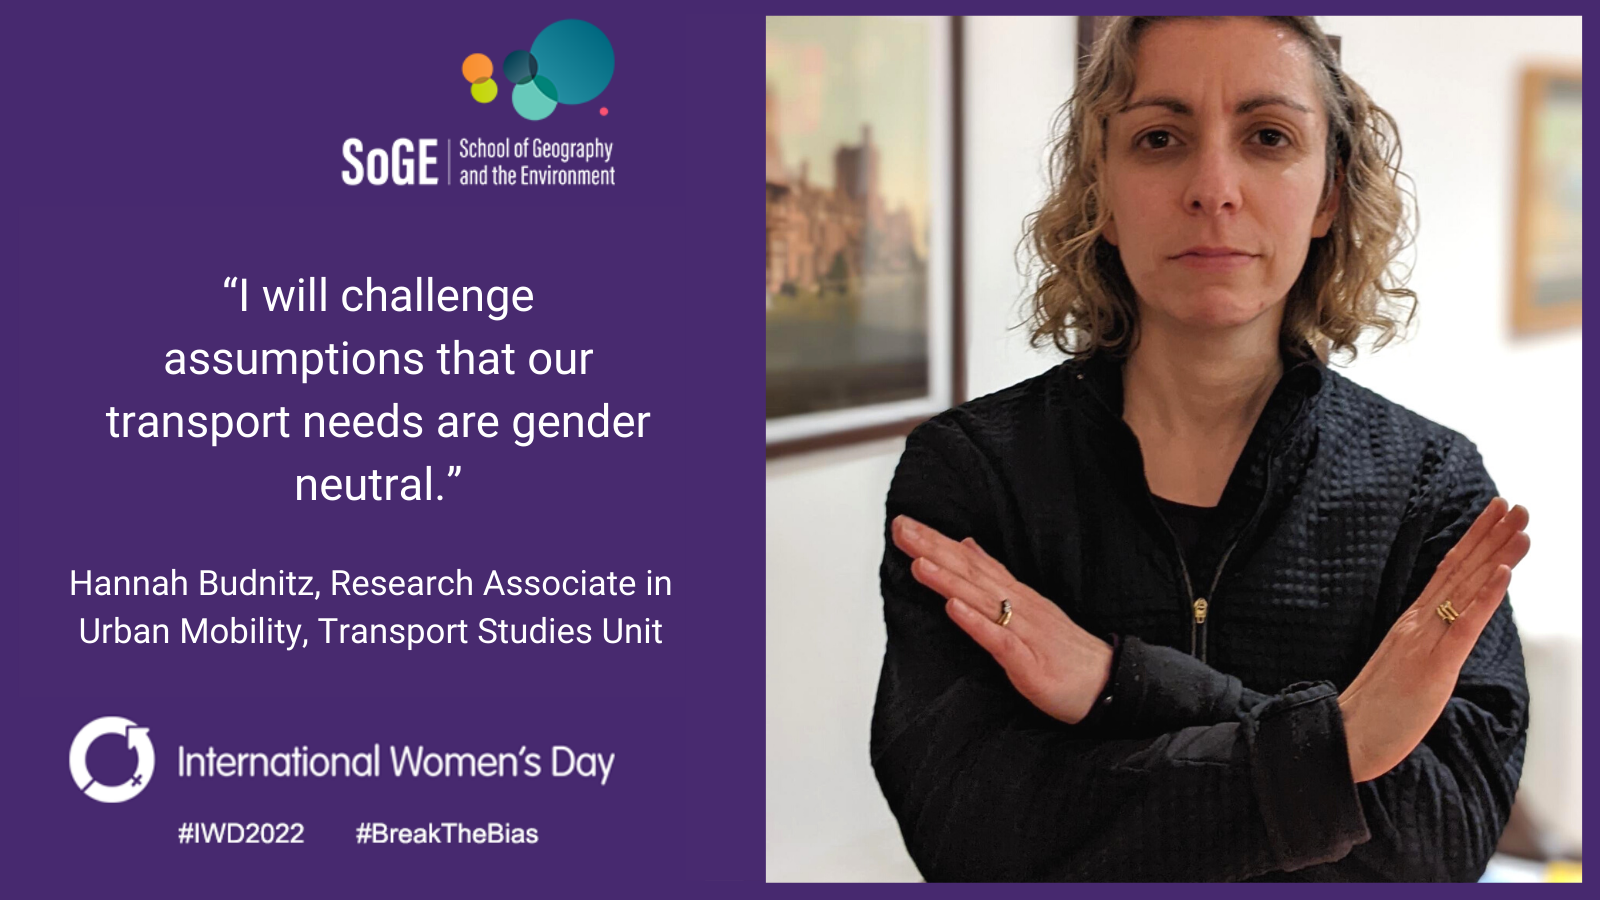 'I will challenge assumptions that our transport needs are gender neutral.' Hannah Budnitz, Research Associate in Urban Mobility, Transport Studies Unit.